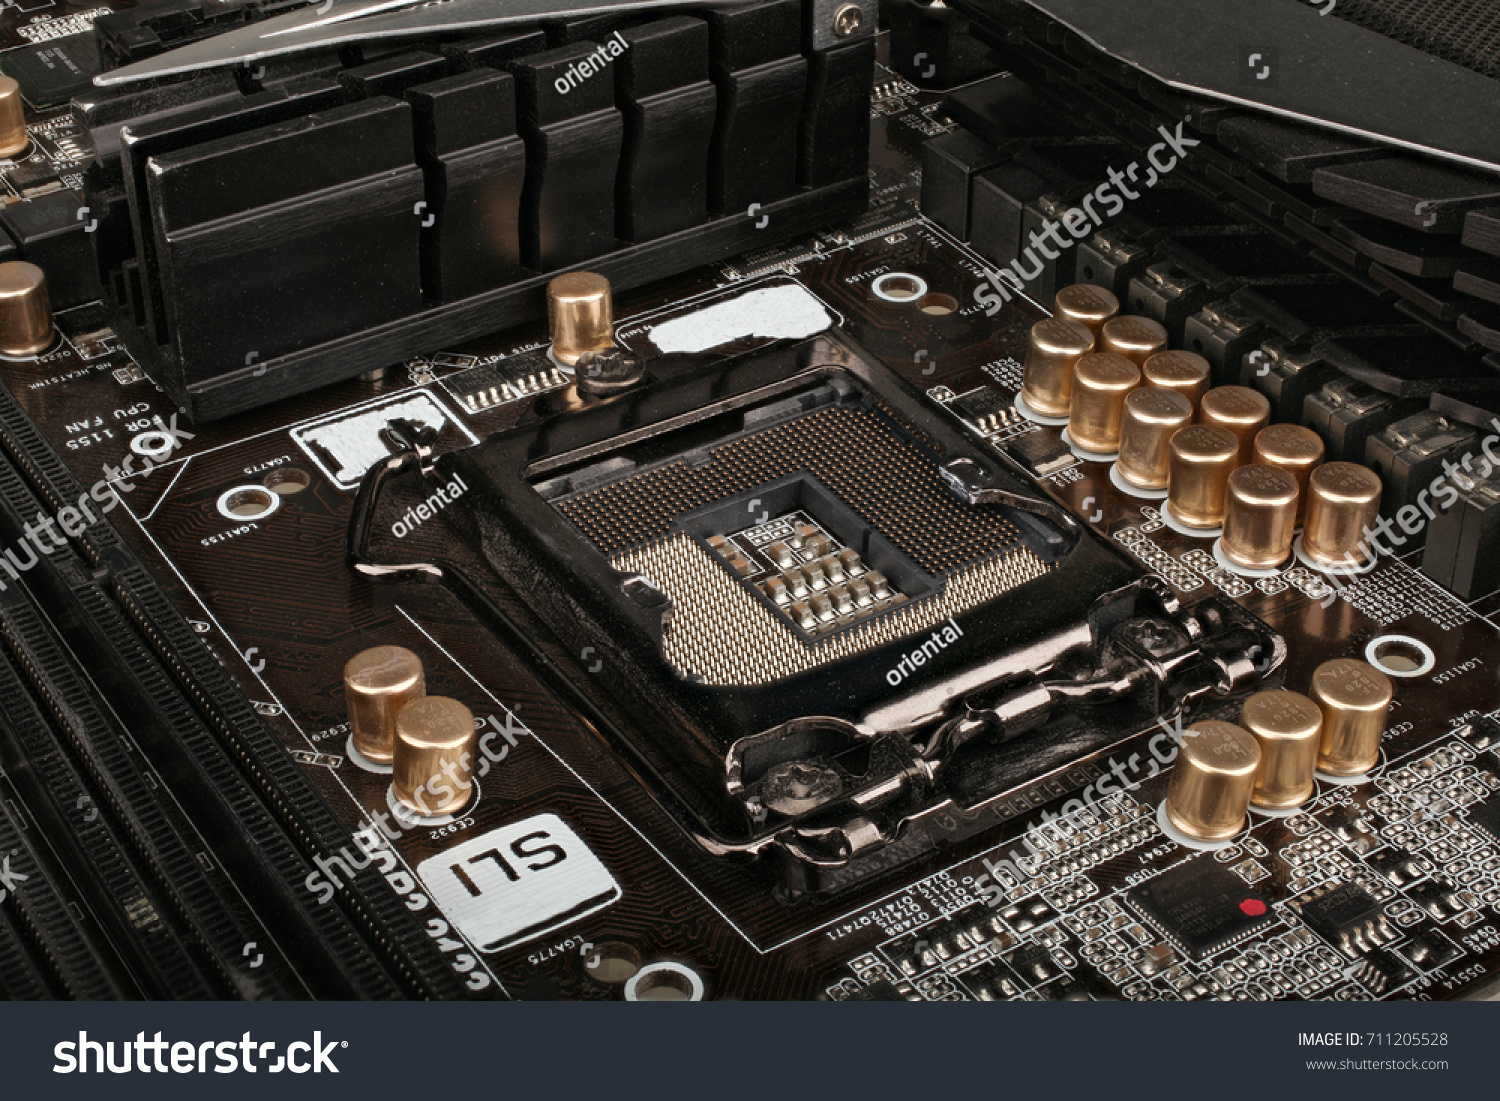 close view at empty processor socket on computer motherboard. #711205528